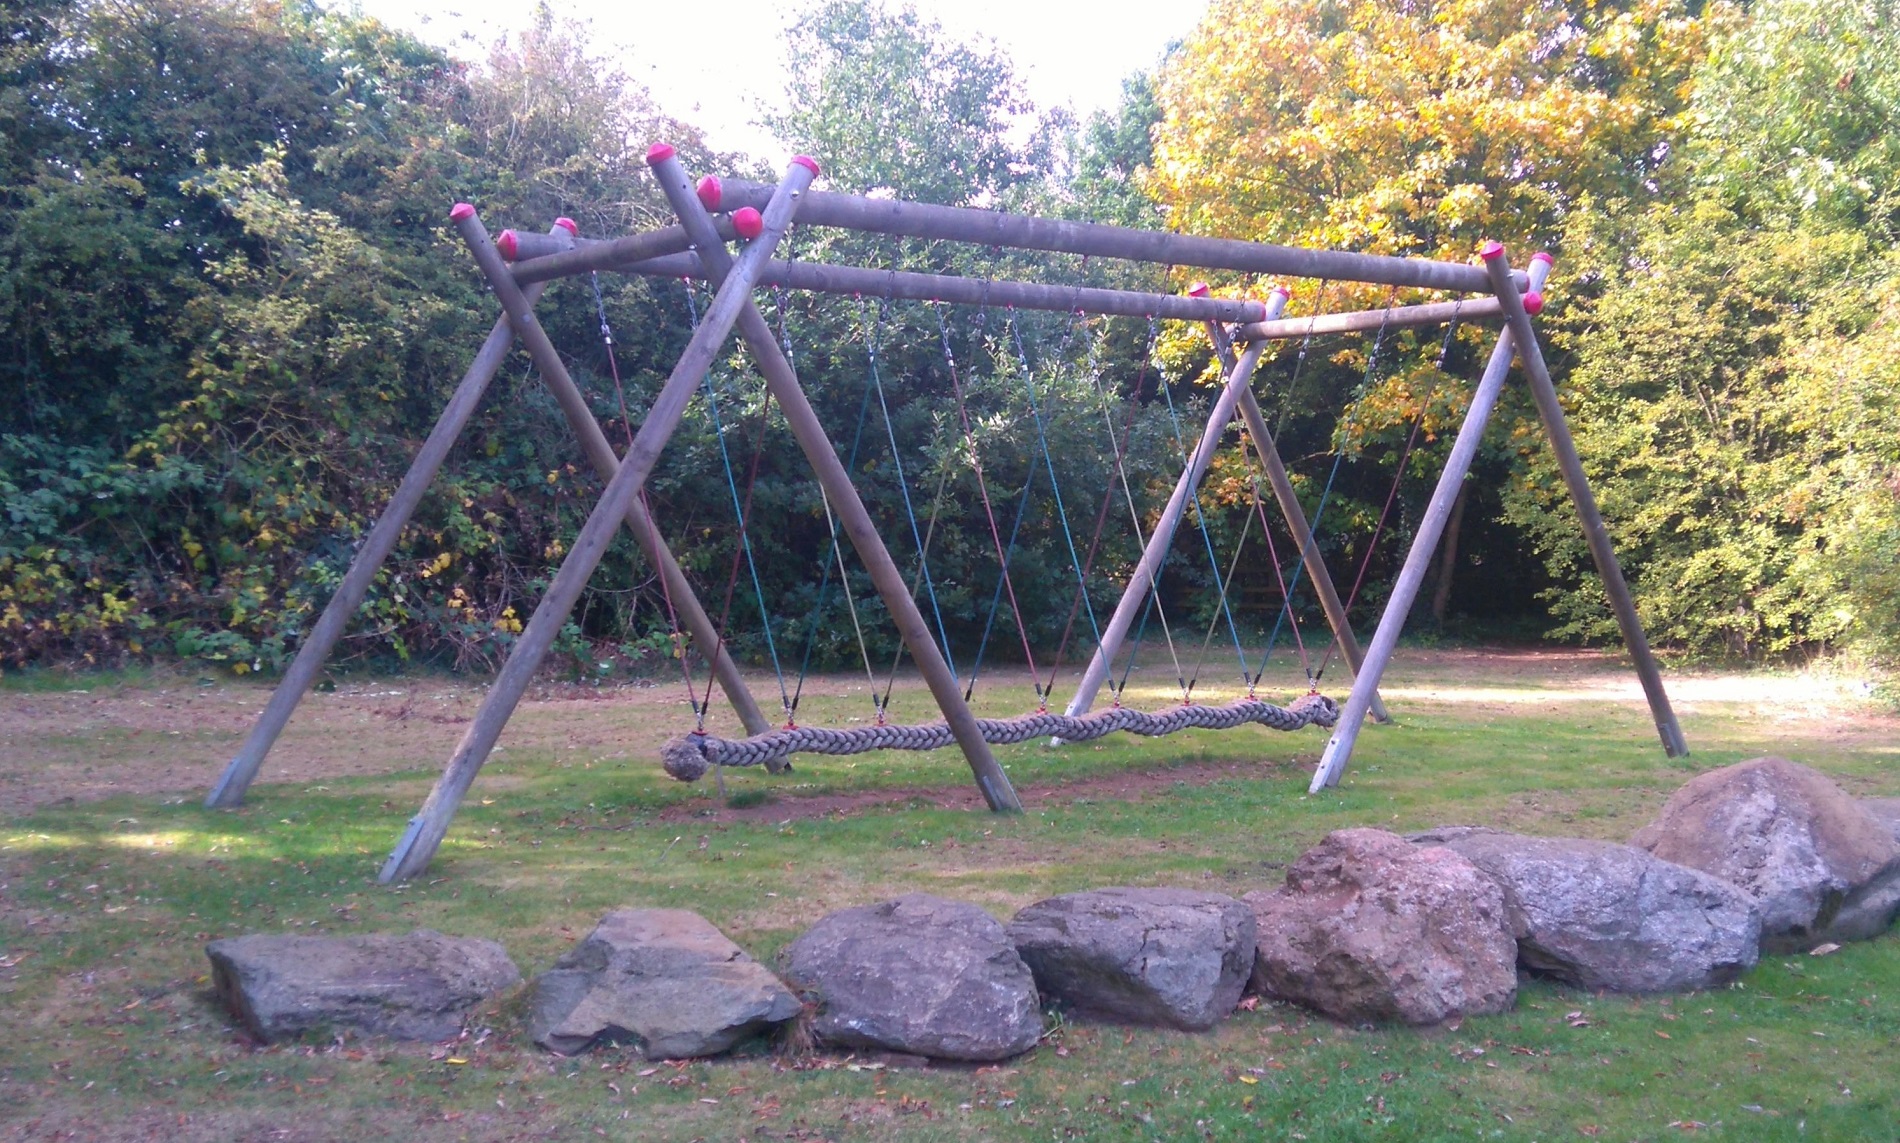 A long swing on a large wooden frame in a playpark, on a bright autumn day.